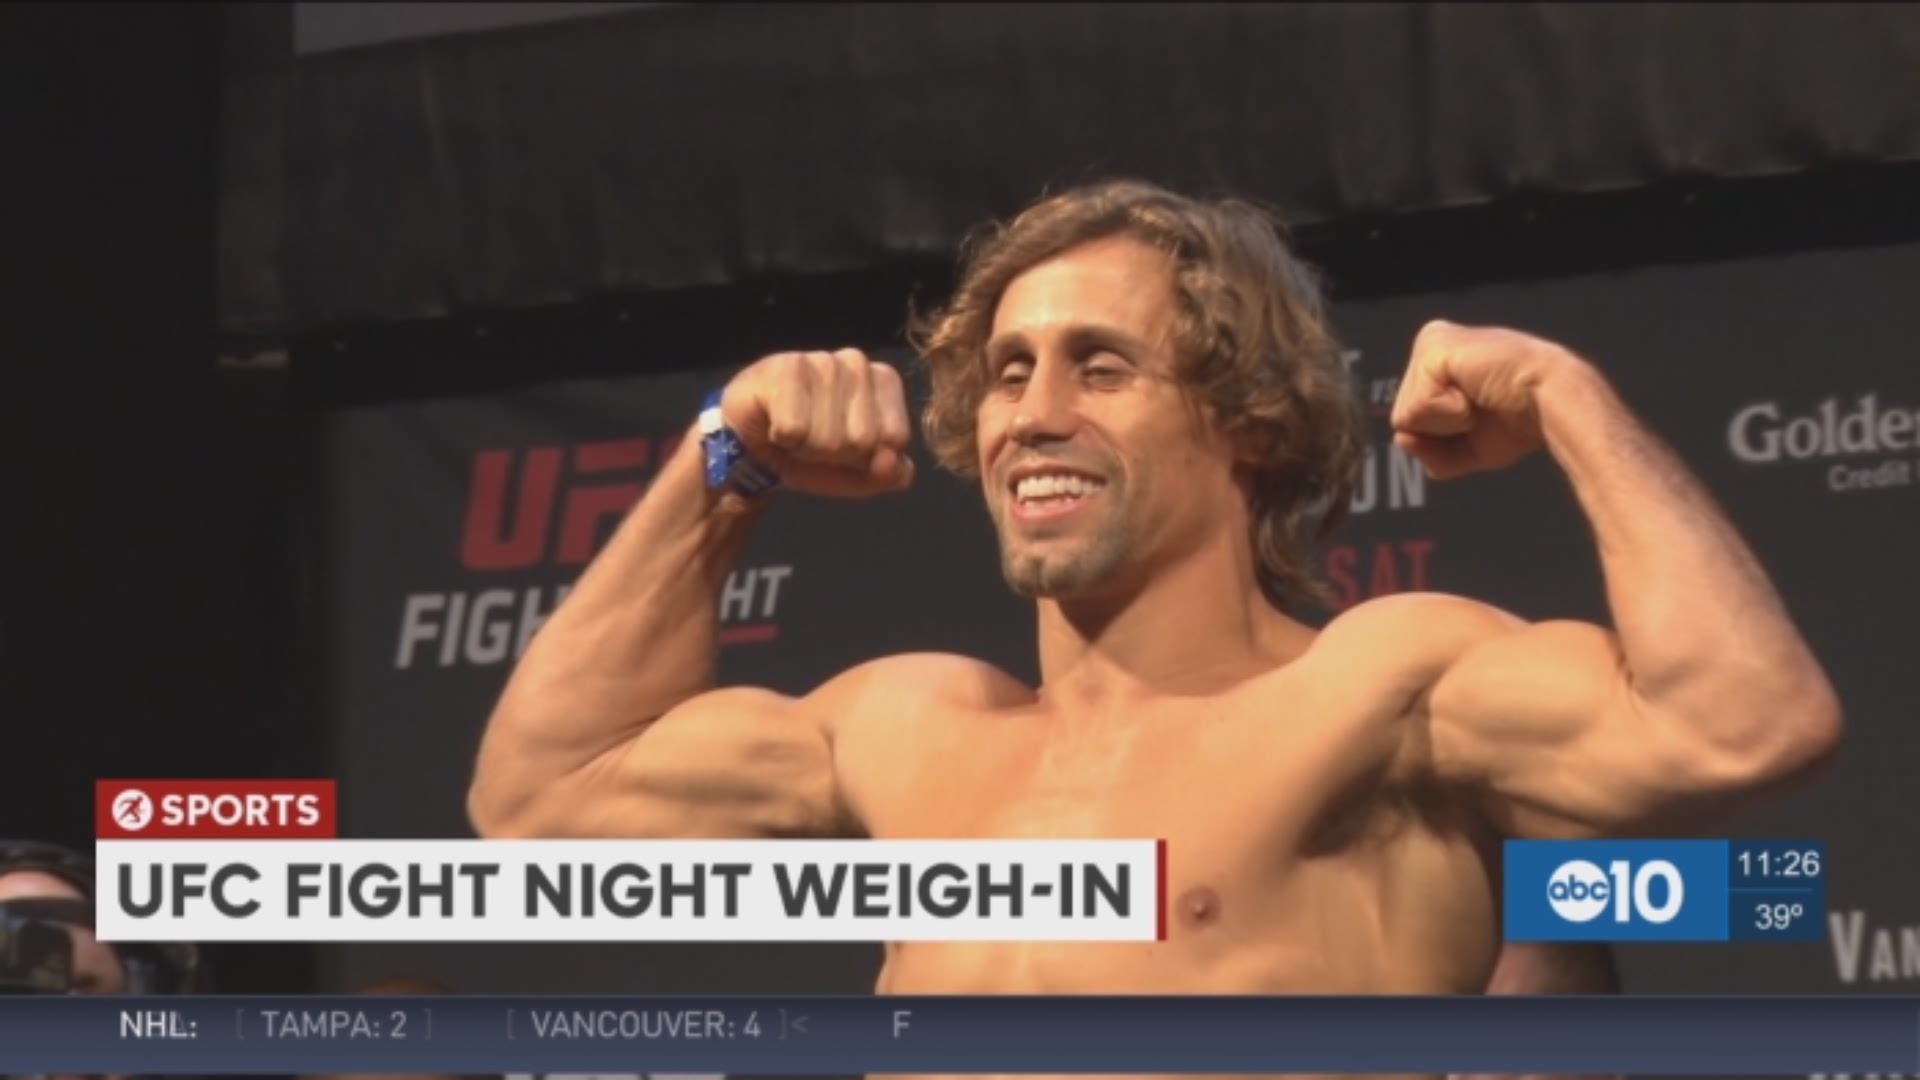 Sacramento native Urijah Faber weighed in for the final time as a UFC fighter and headliner Paige VanZant had a dance-off with her main event opponent Michelle Waterson, during Friday's weigh-in at the Golden 1 Center.